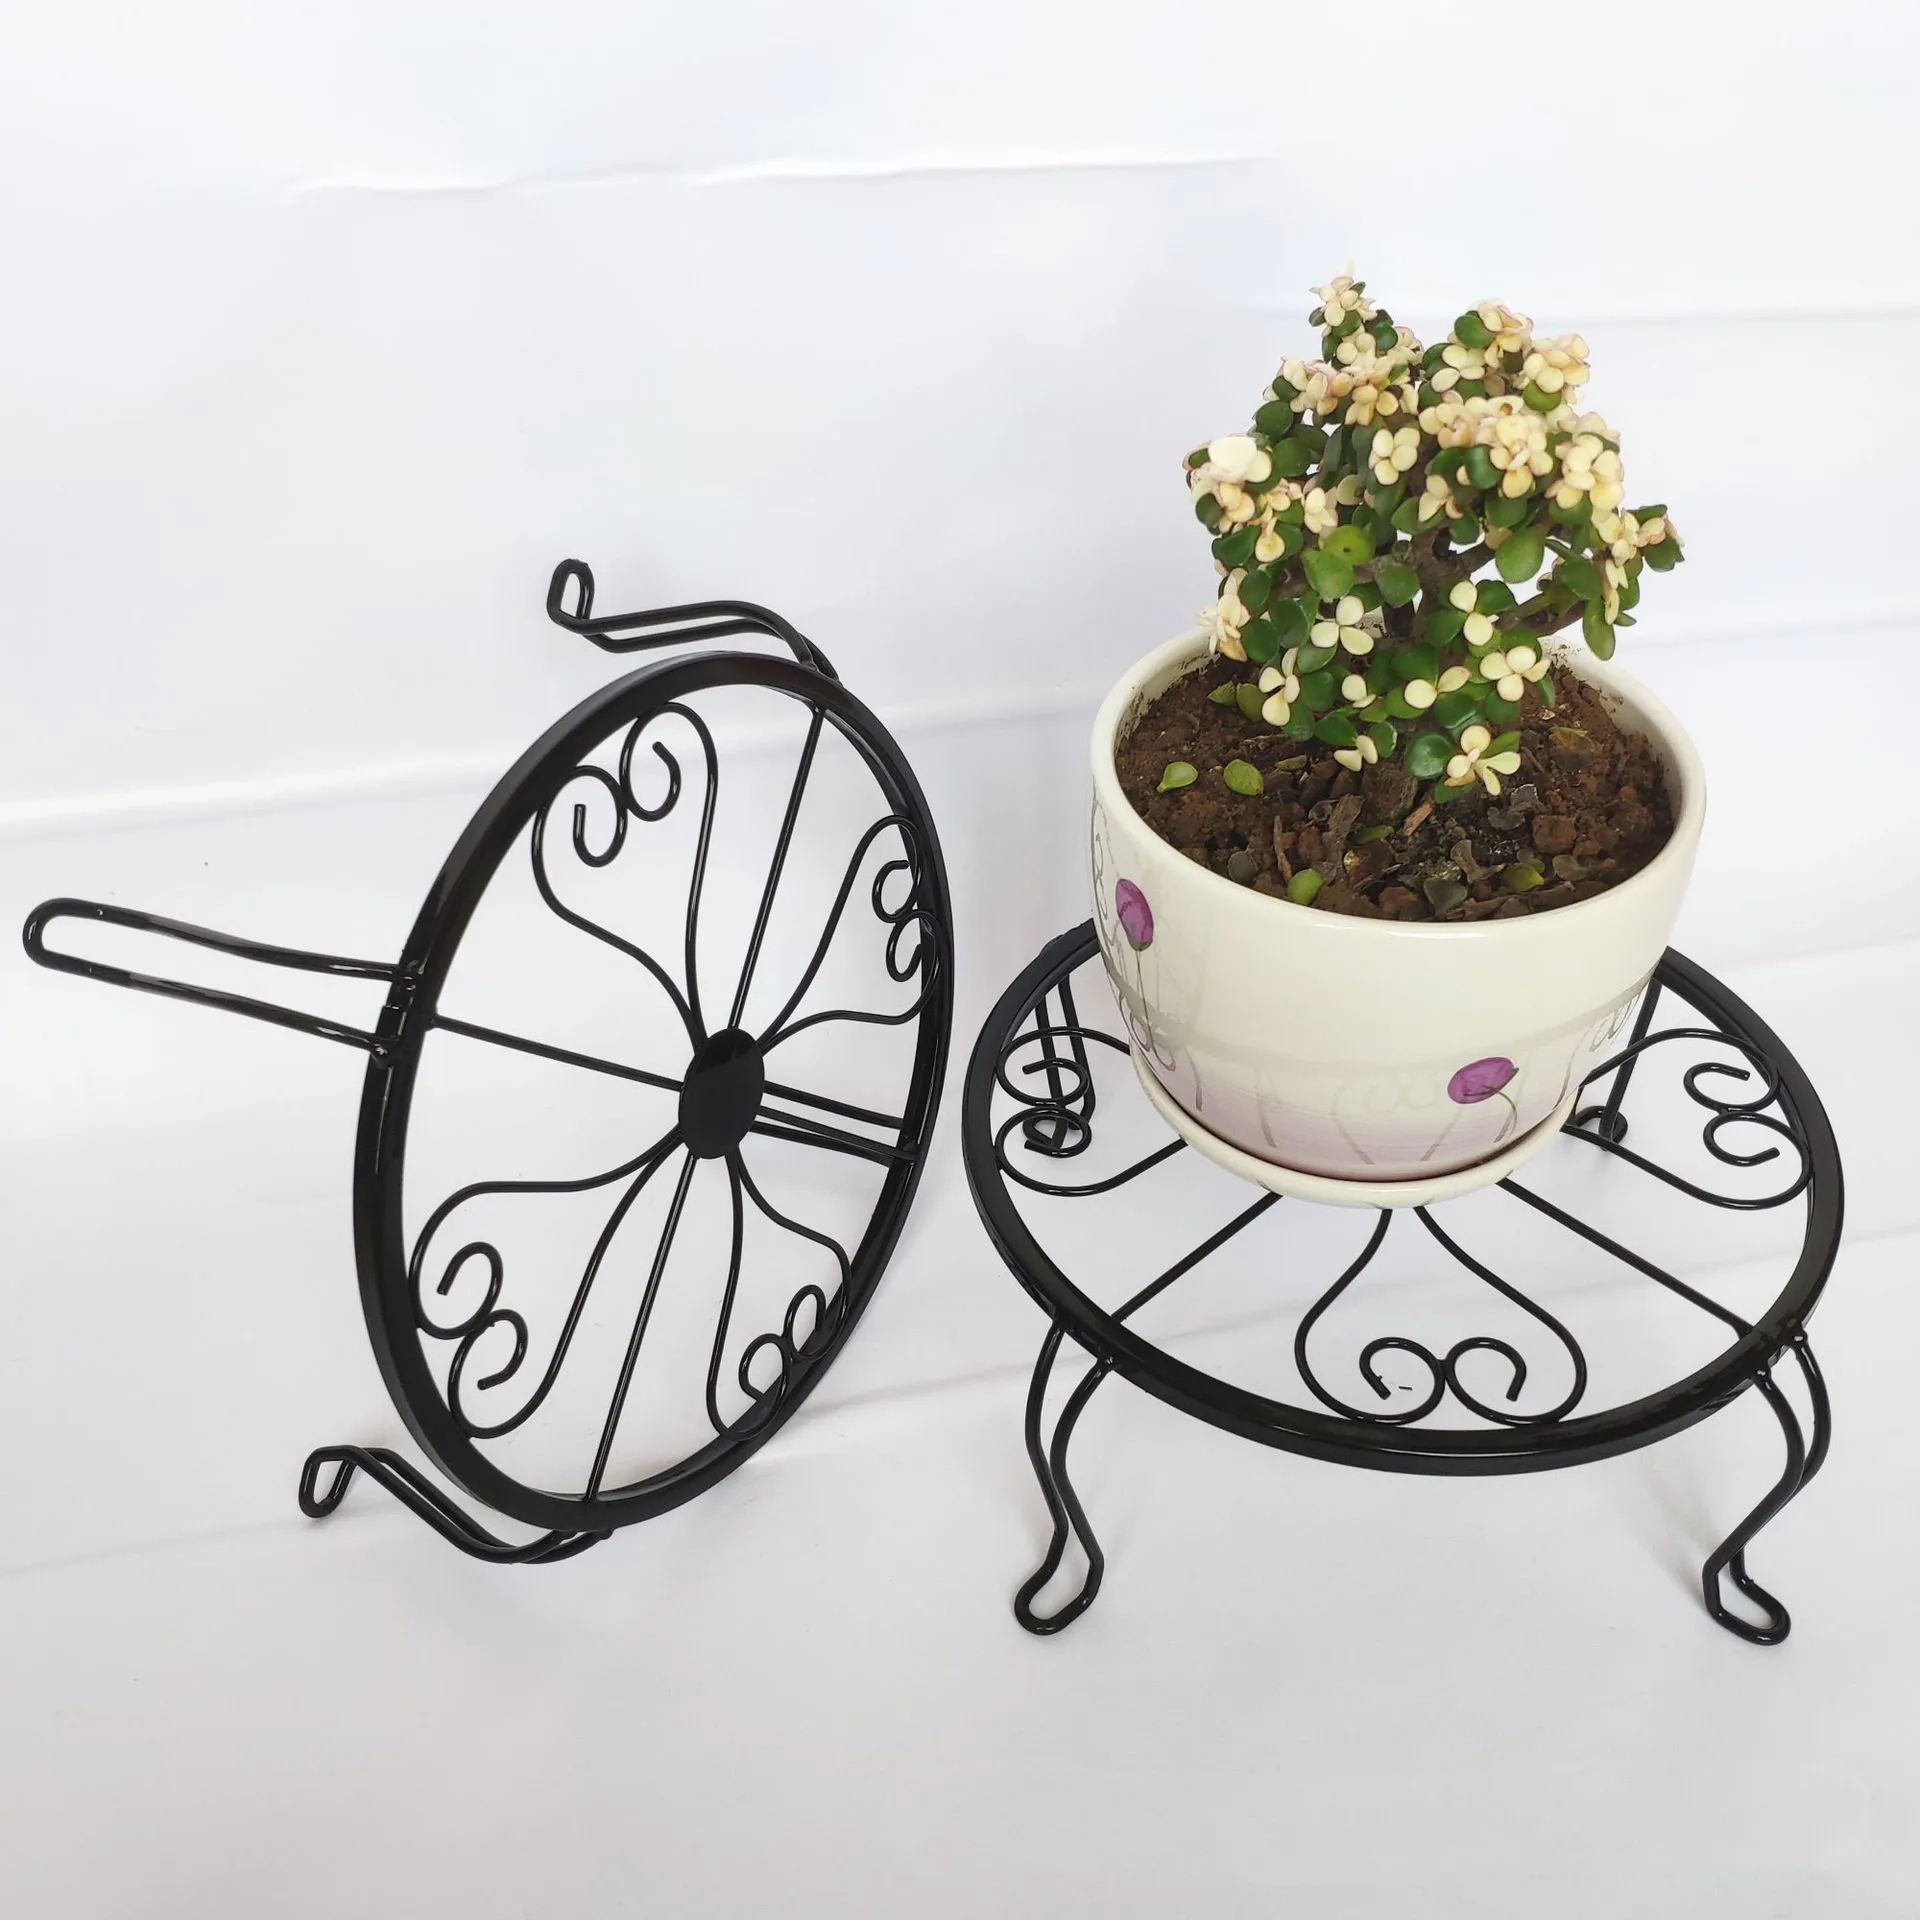 

Metal Plant Stands for Flower Pot Heavy Duty Potted Holder Metal Rustproof Iron Garden Container Round Supports Rack for Planter